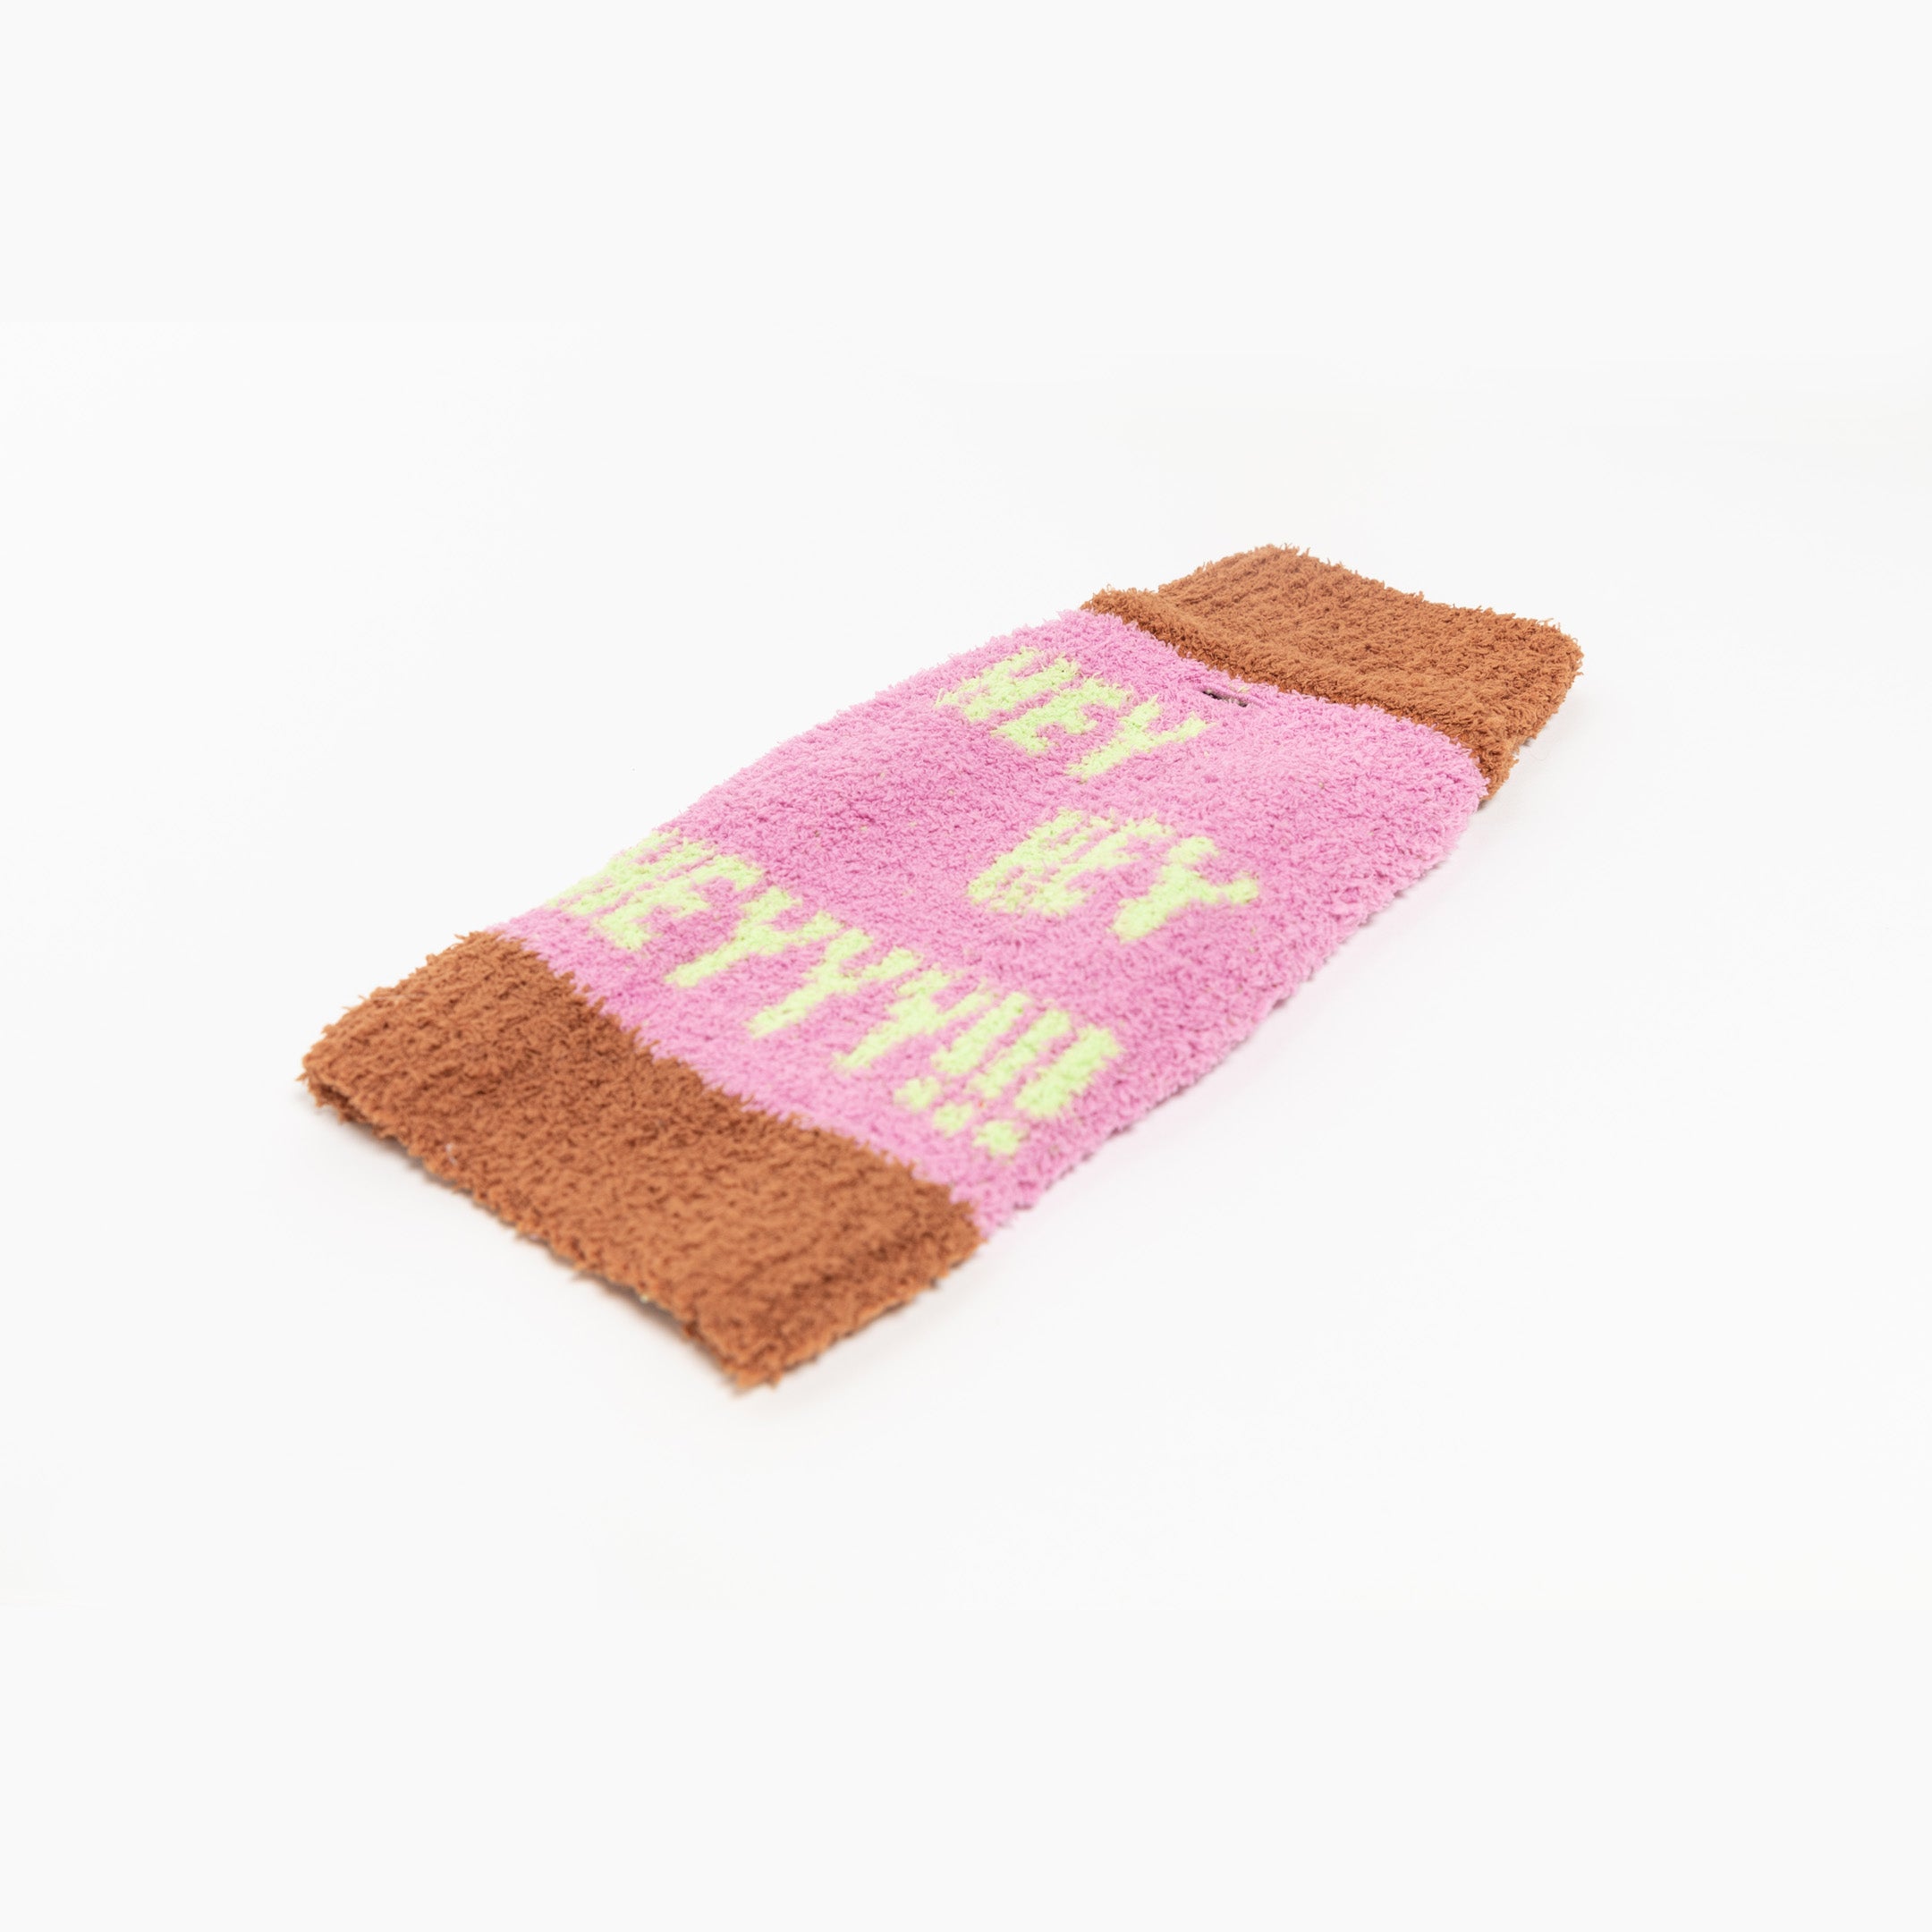 "The Furryfolks" Hey sweater in pink with brown trim, displayed on a white background.